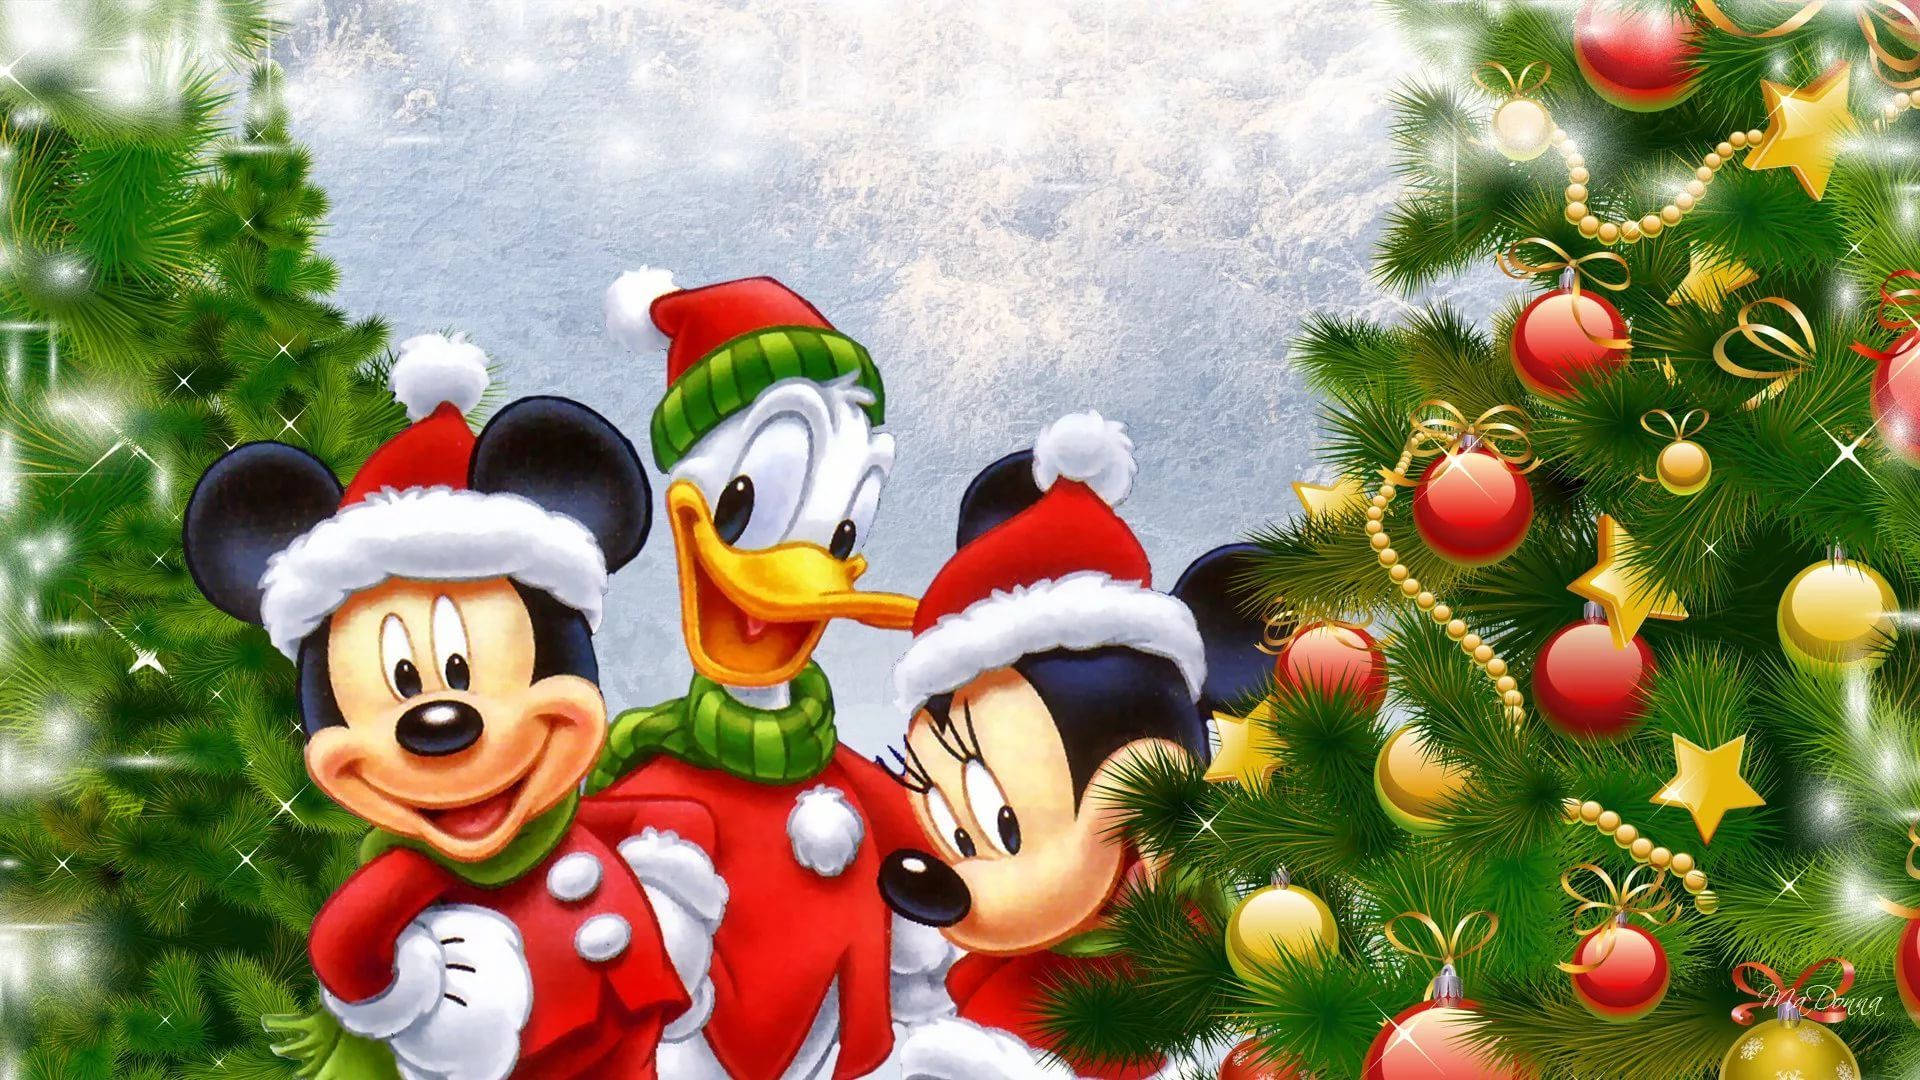 Disney 1920x1080 Hd Mickey Mouse And Friends Christmas Trees